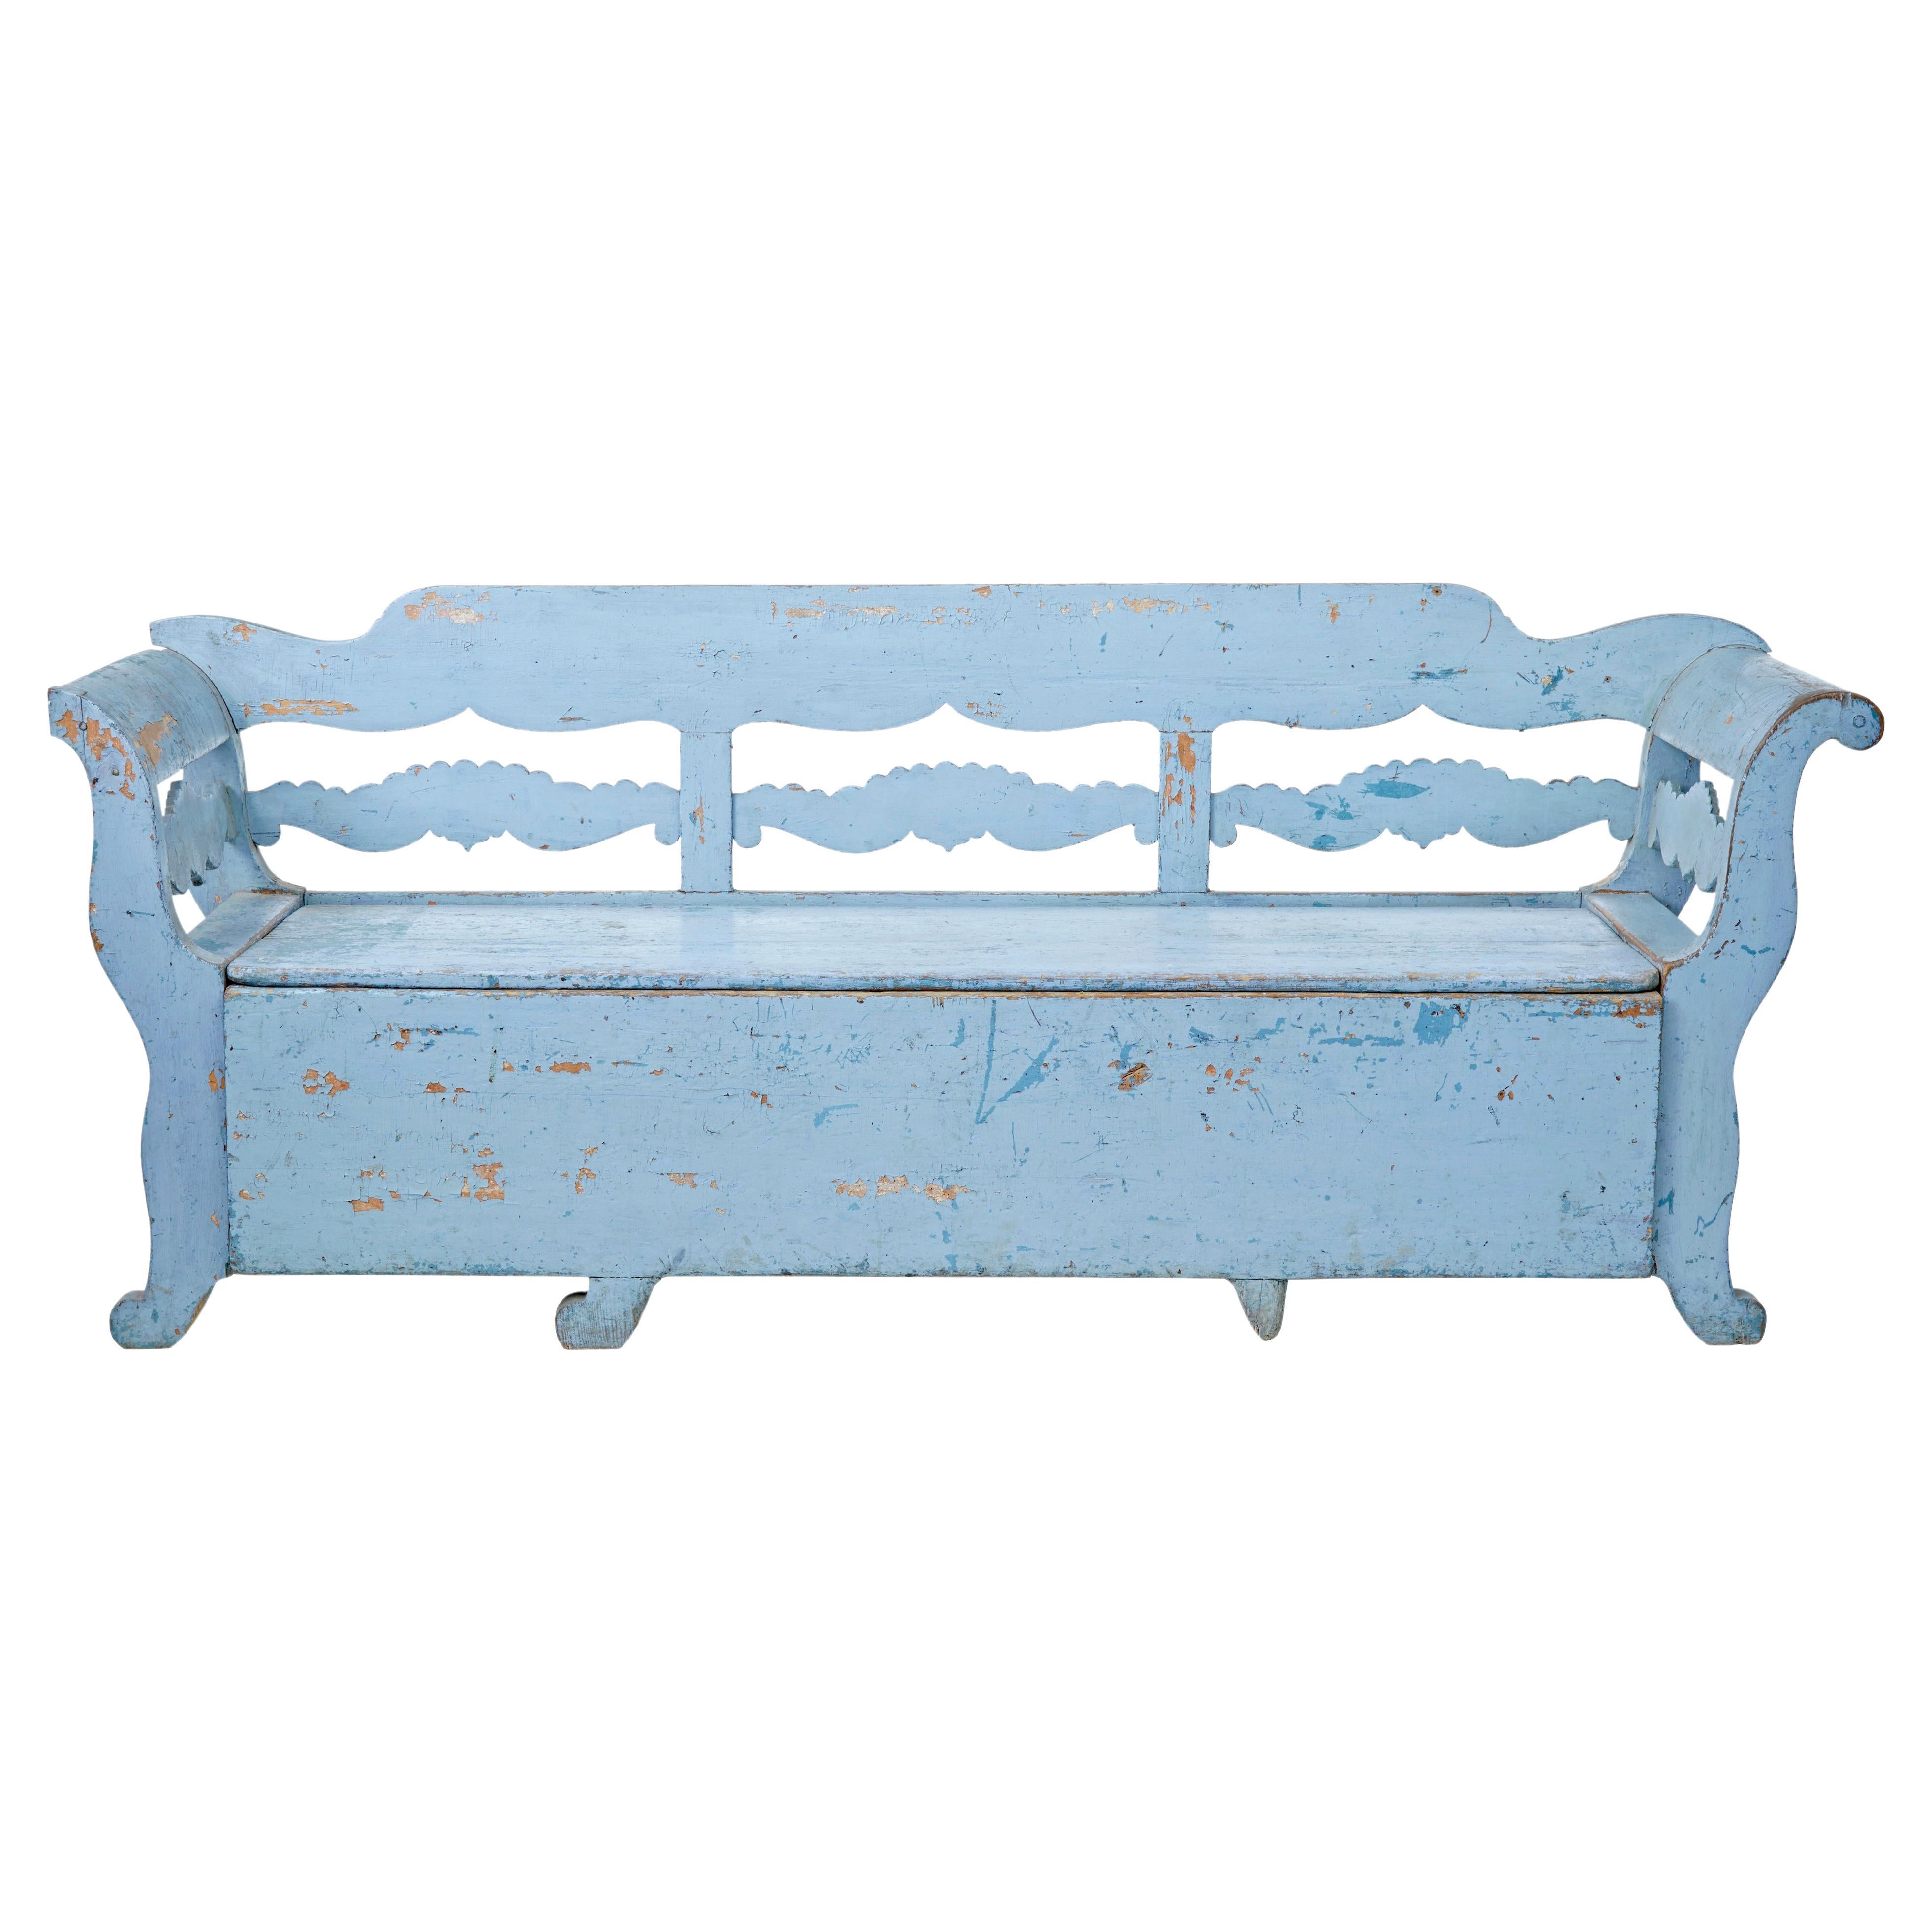 Mid-19th Century Large Painted Swedish Bench Daybed